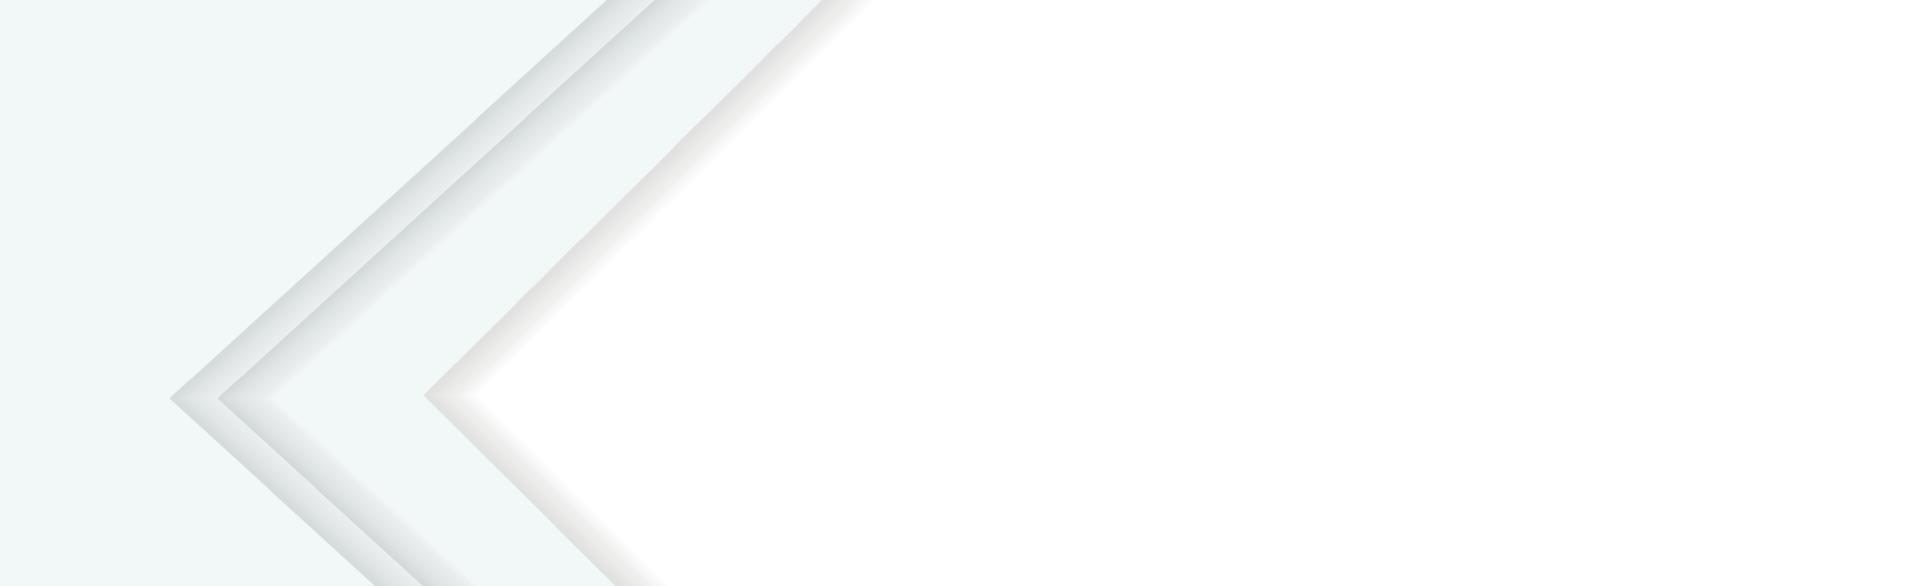 White vector panoramic background with lines